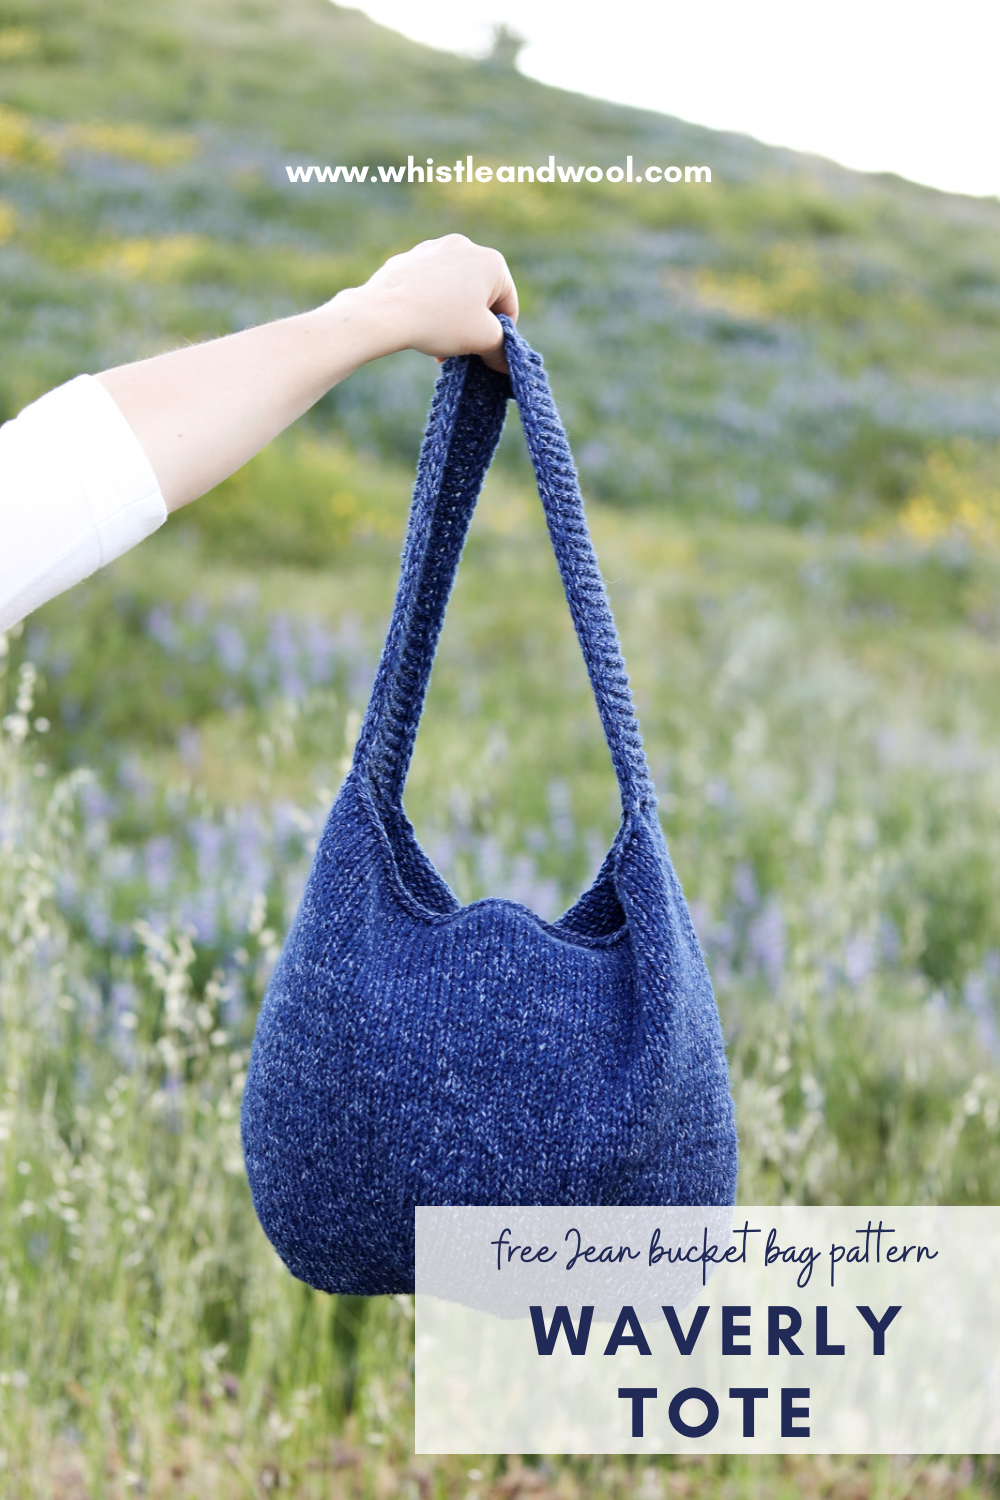 Waverly Tote — Whistle and Wool